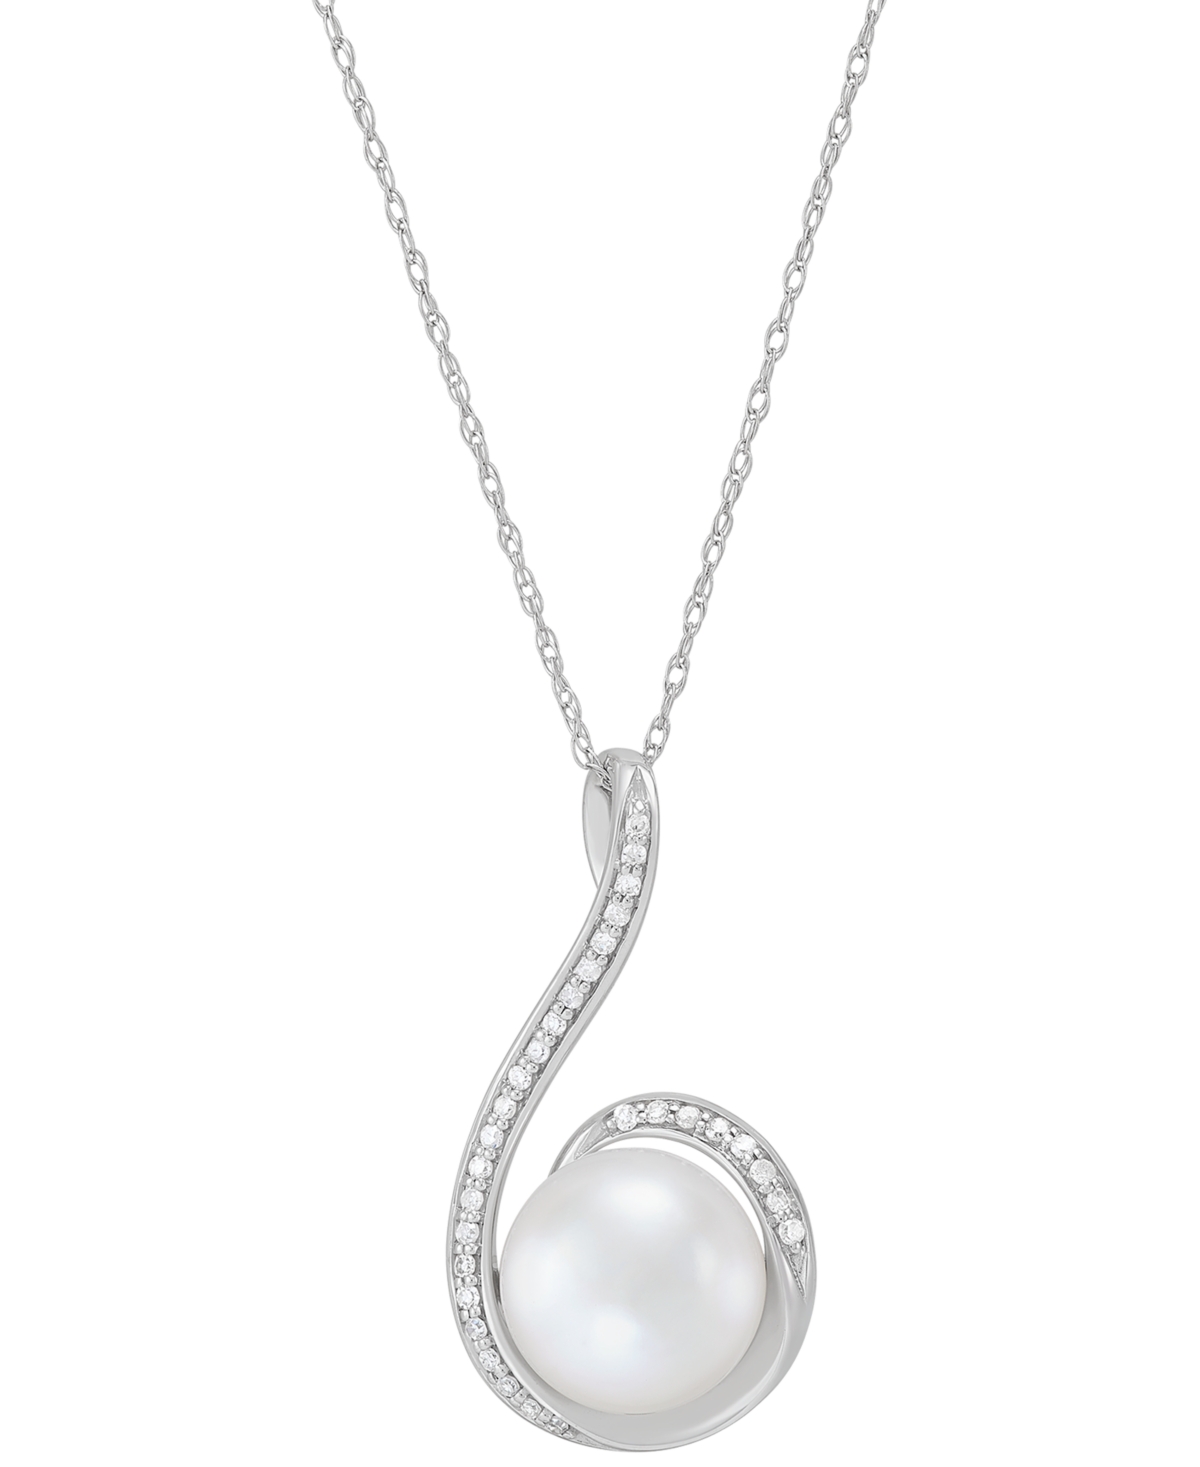 Cultured Freshwater Pearl (9mm) & Diamond (1/10 ct. t.w.) Swirl 18" Pendant Necklace in 14k White Gold - White Gold